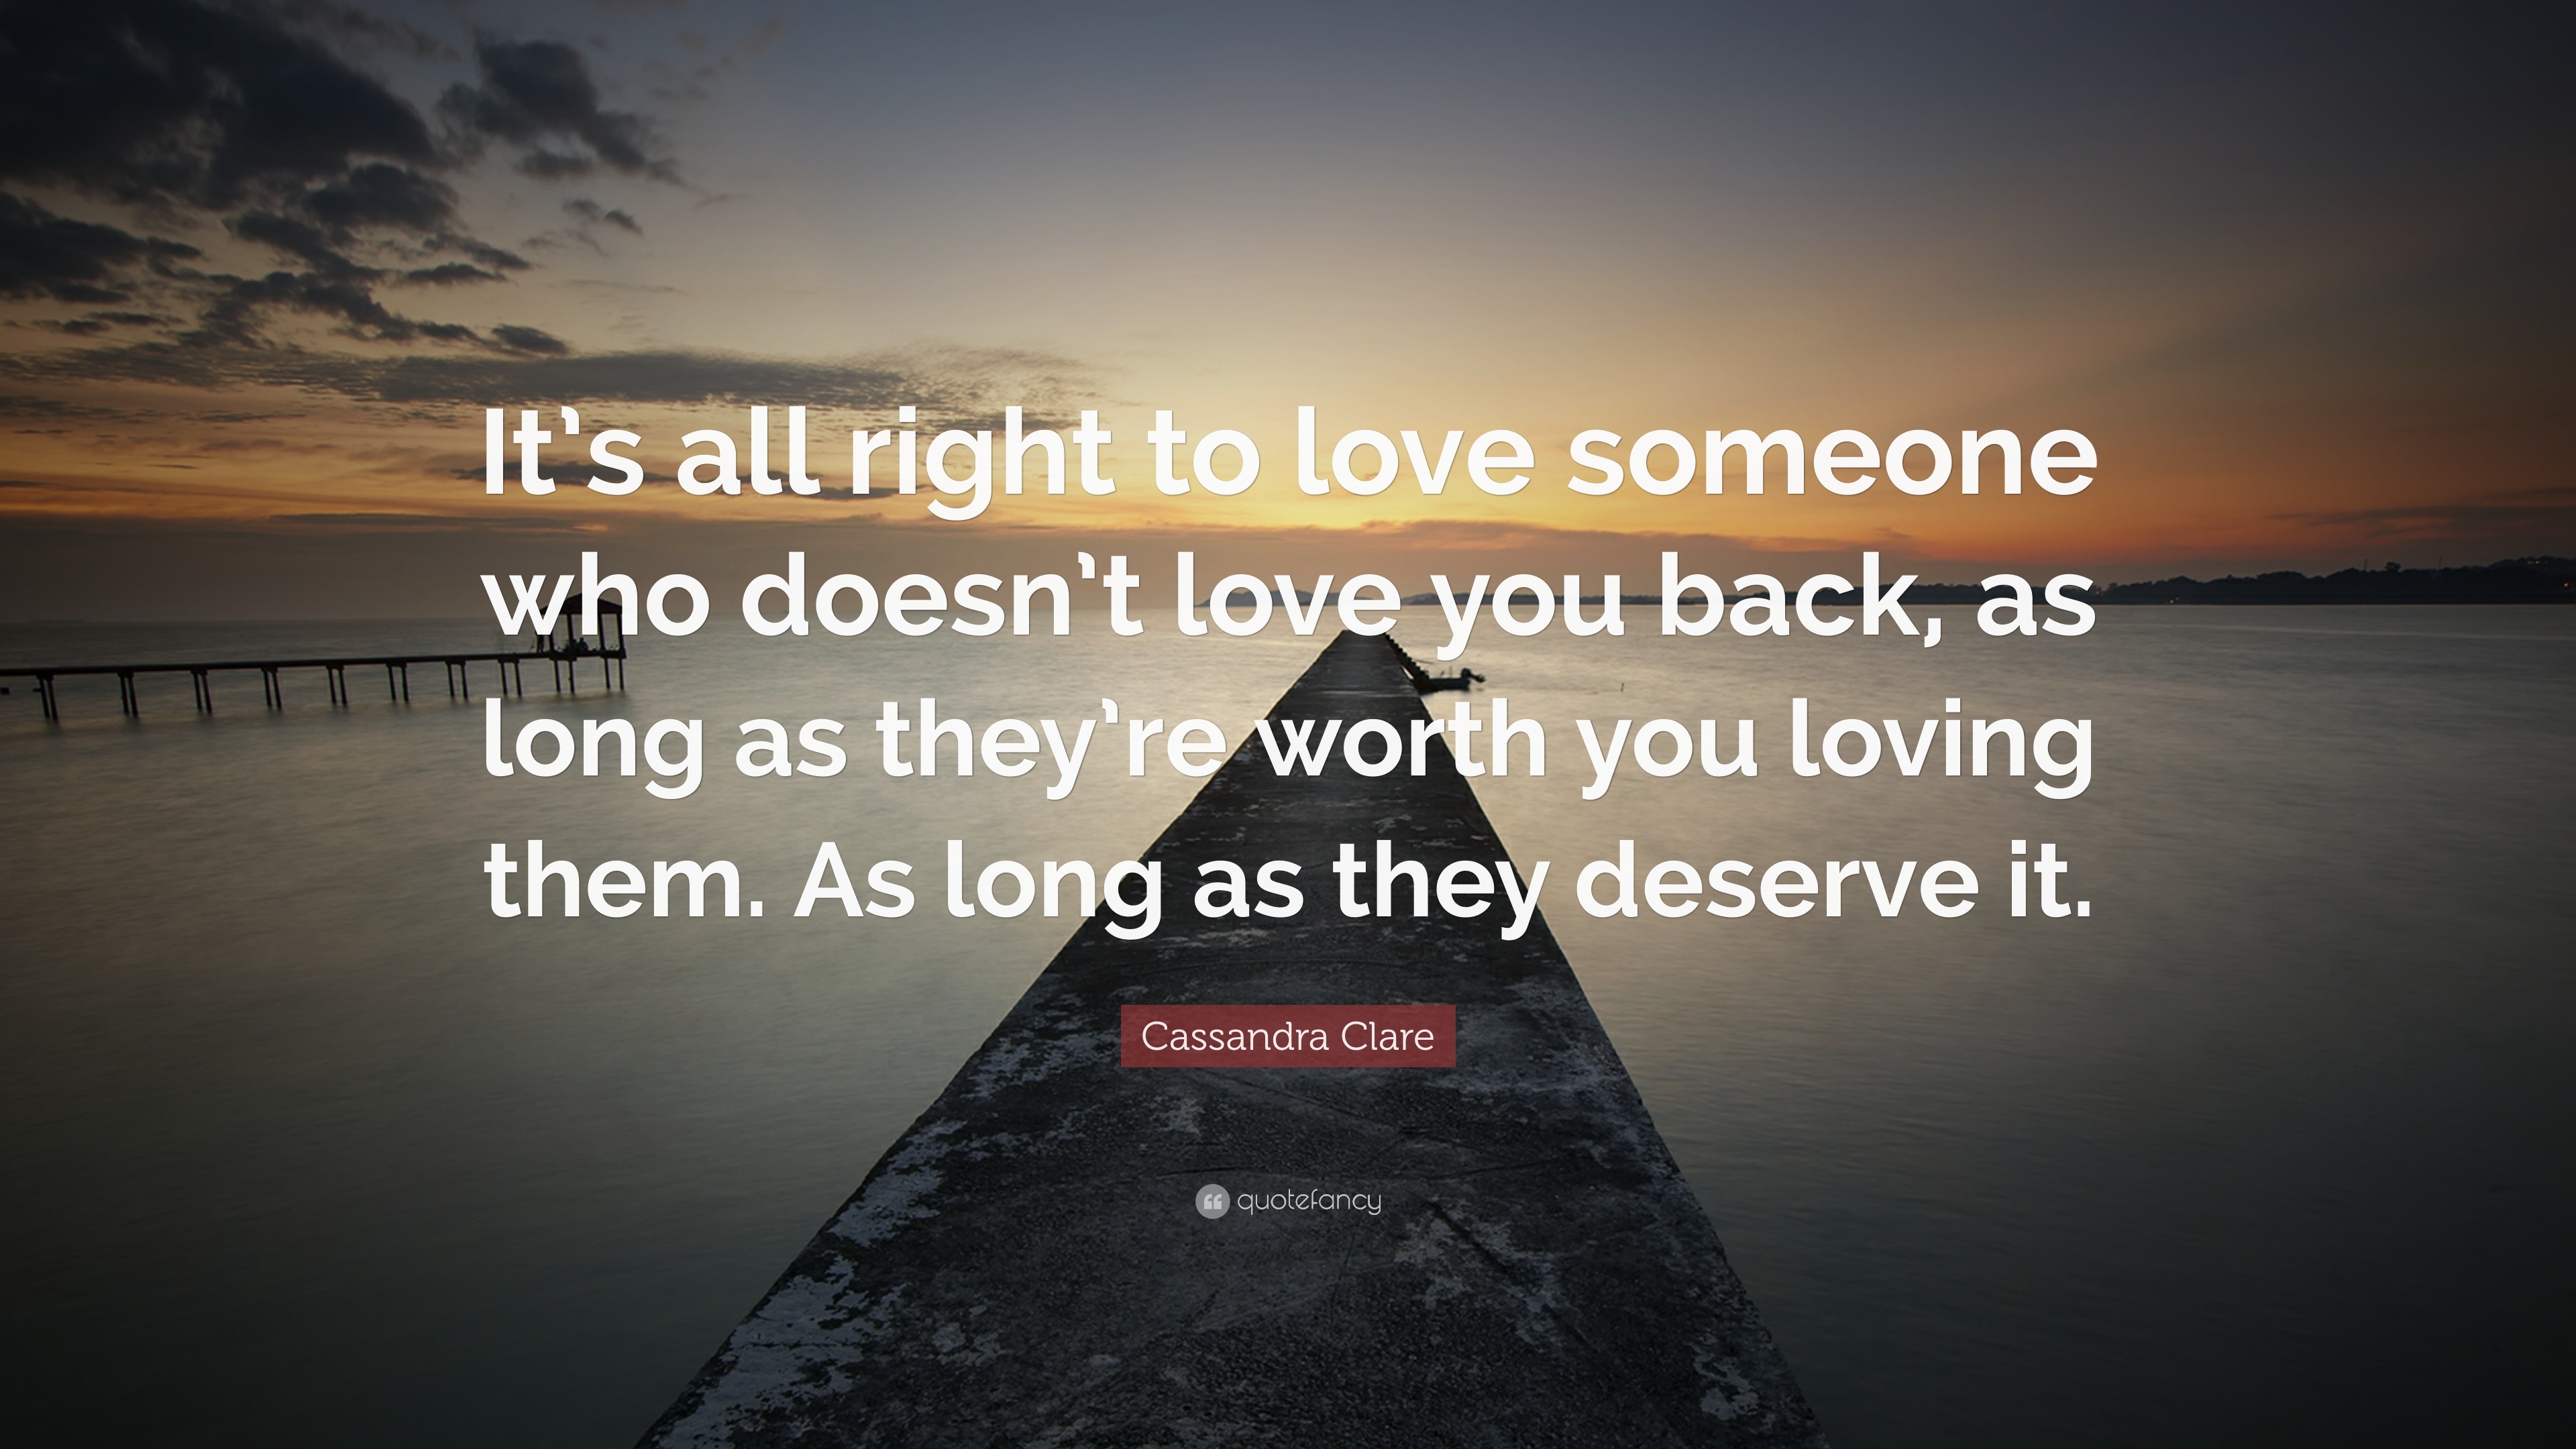 Cassandra Clare Quote: “It's All Right To Love Someone Who Doesn't Love You Back, As Long As They're Worth You Loving Them. As Long As They Dese...”